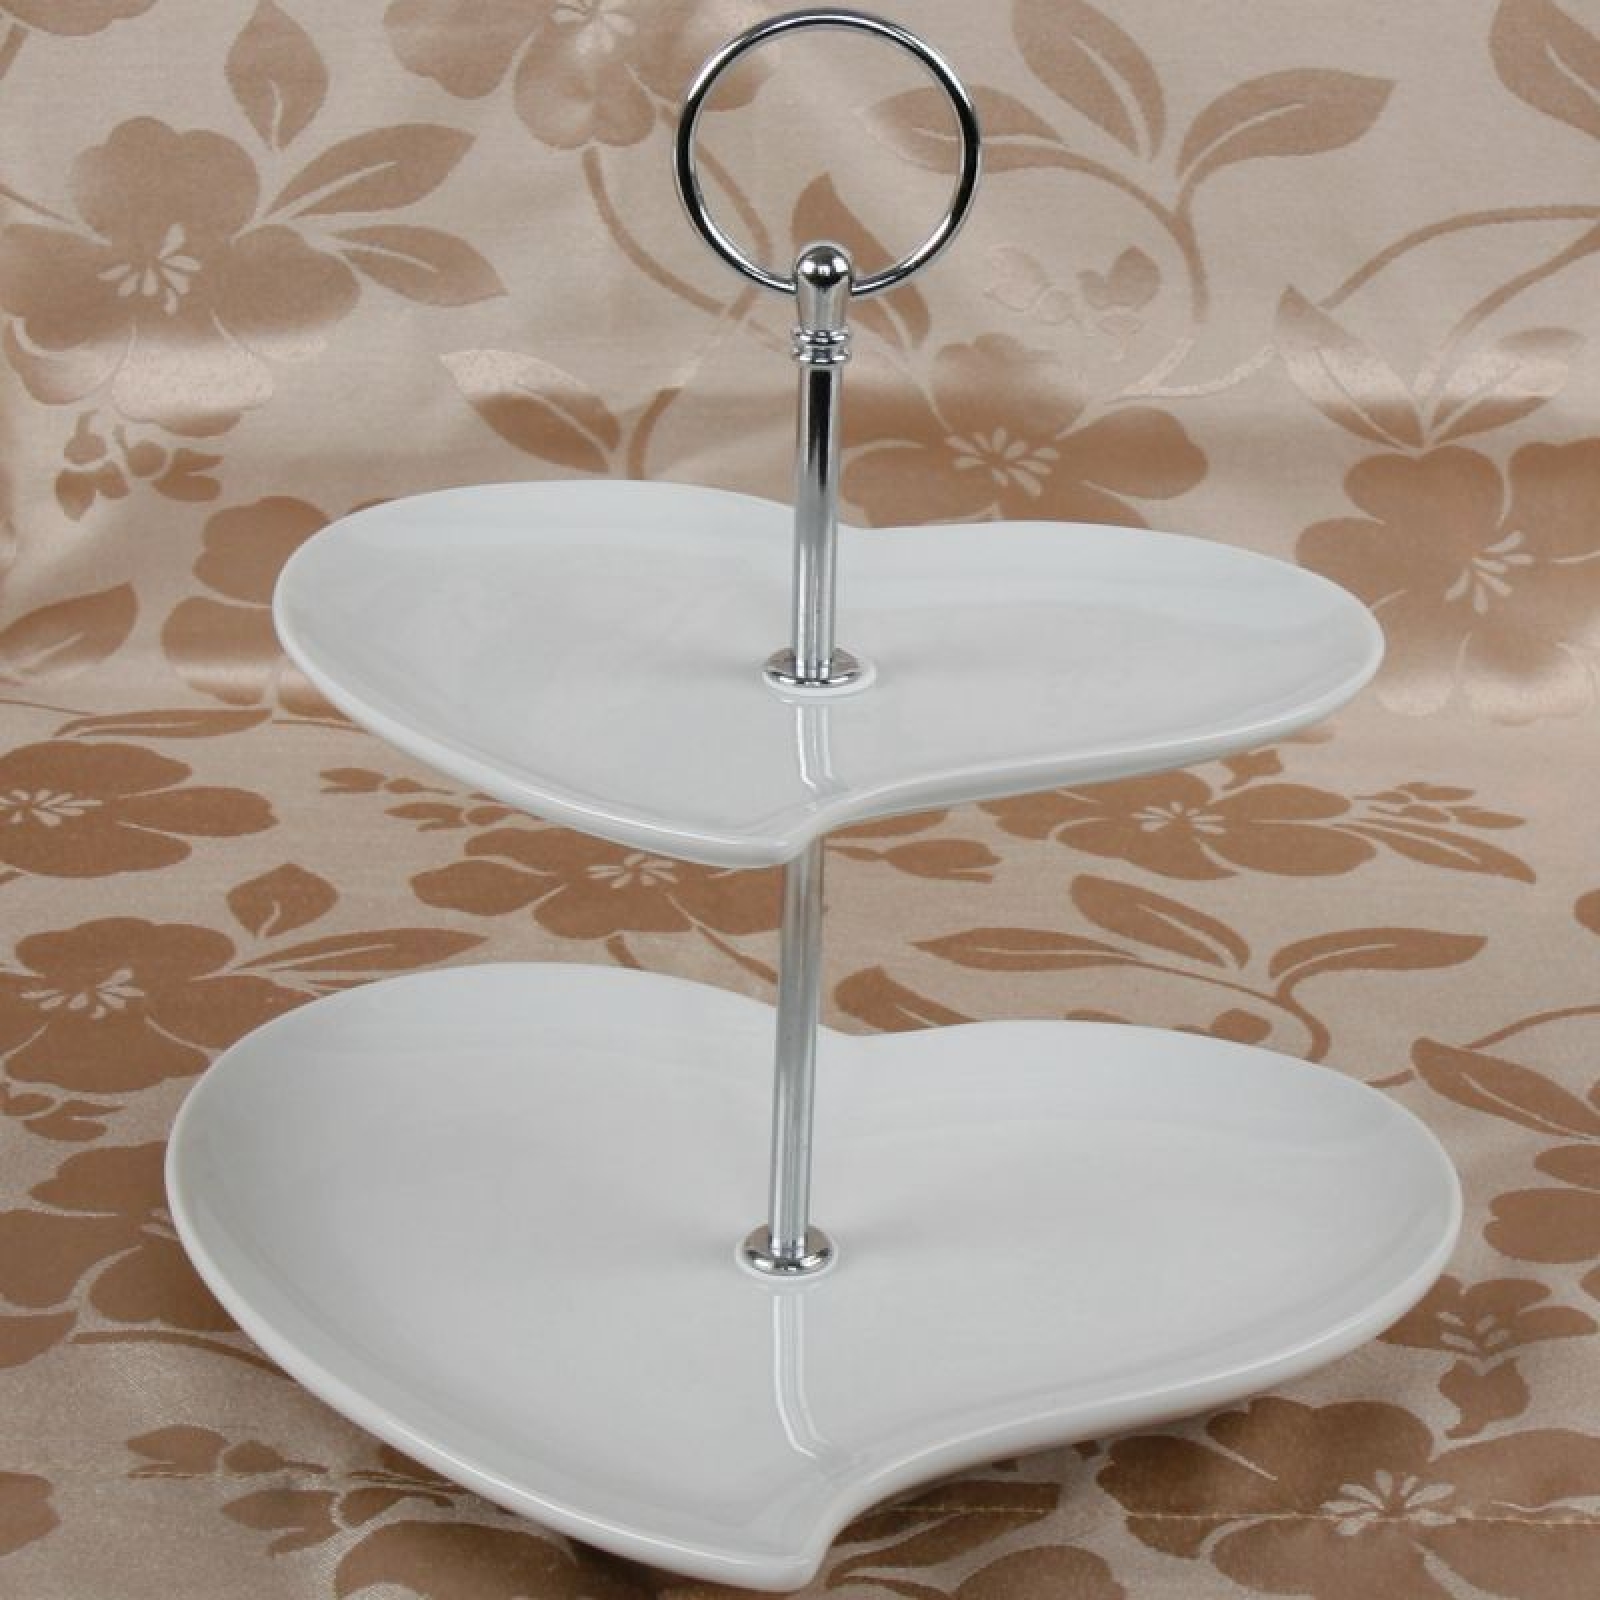 Heart Shaped Wedding Cake Stands